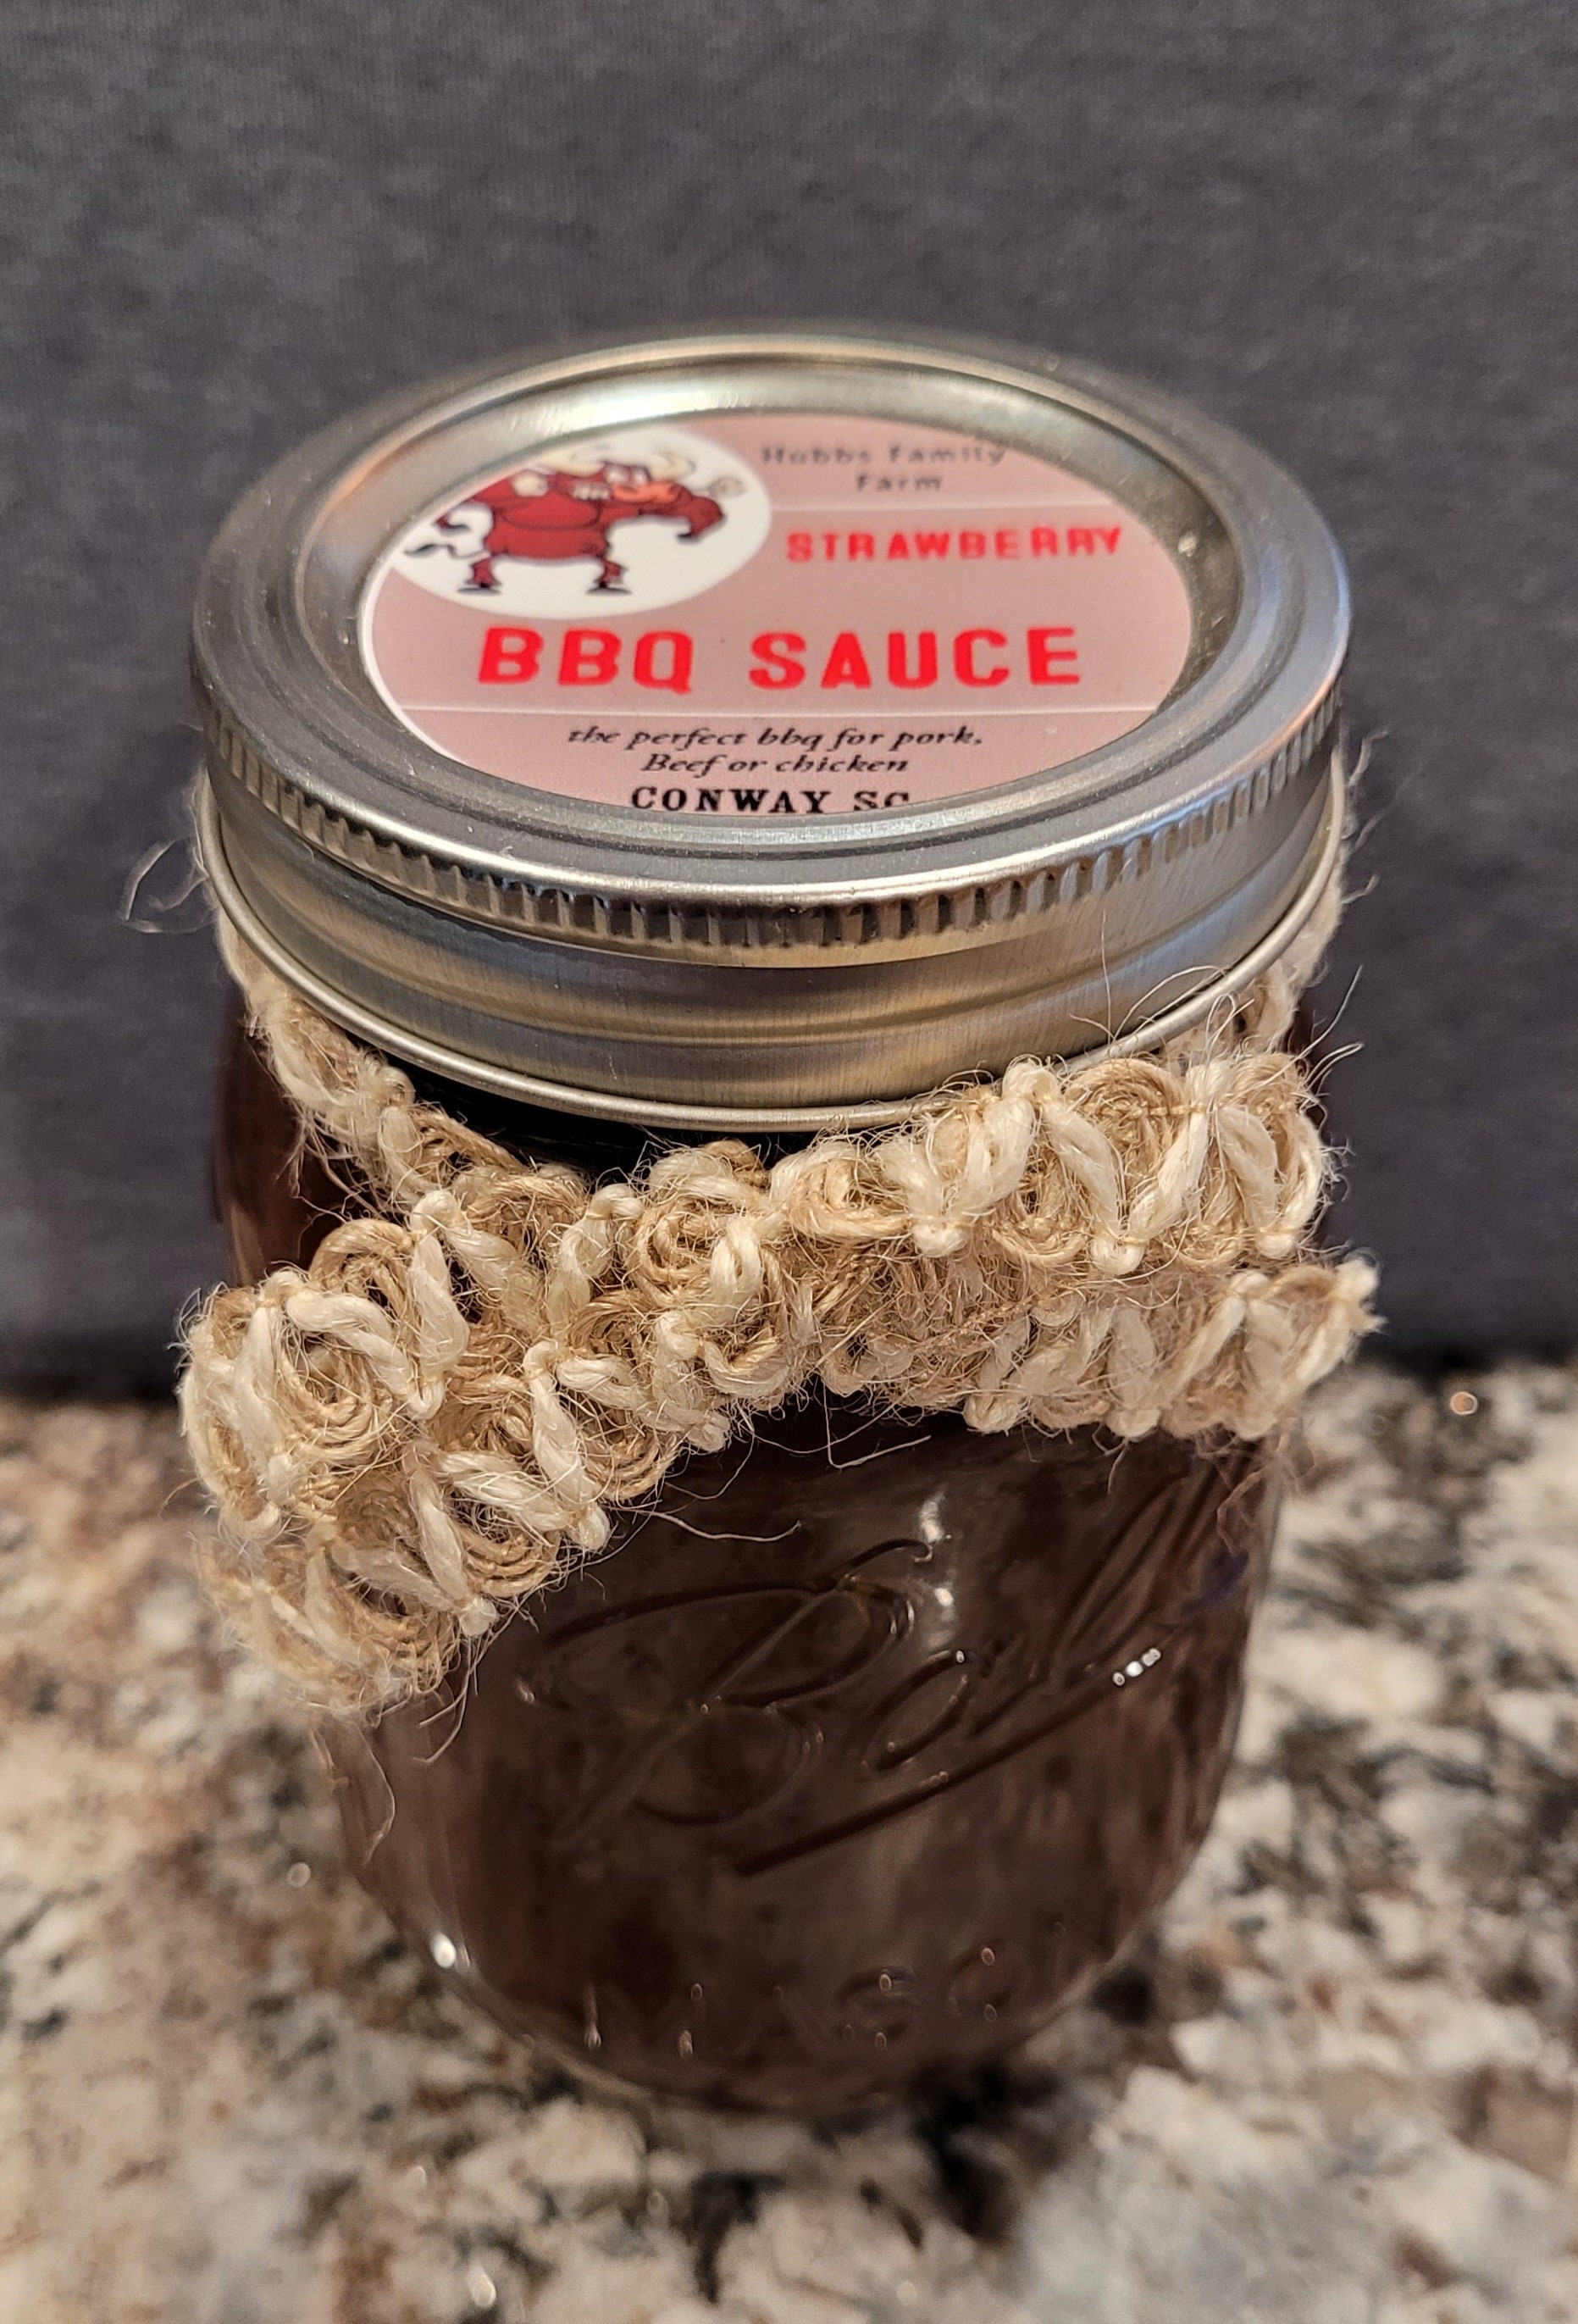 Hubbs Family Farm Southern Famous Strawberry BBQ Sauce